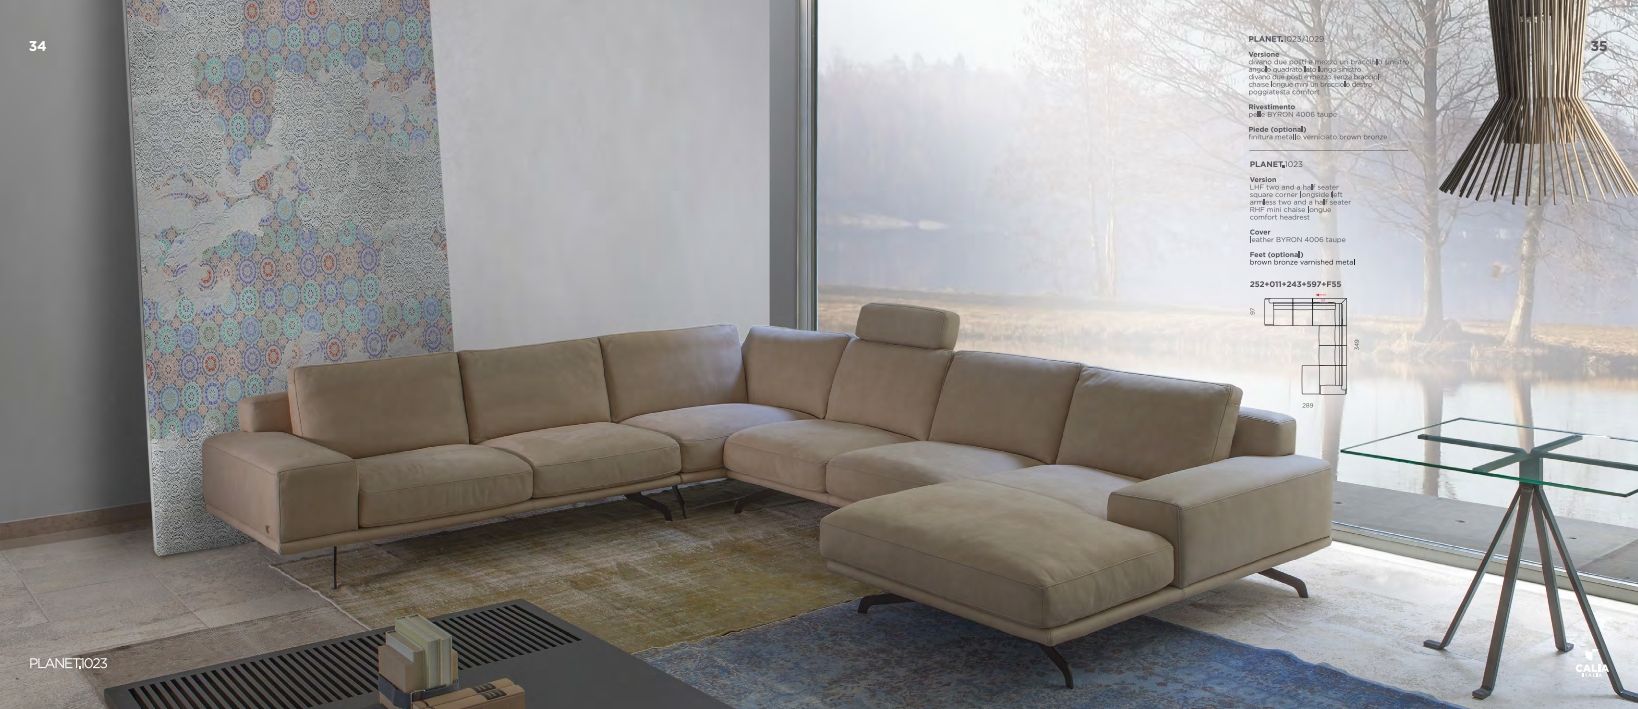 The Planet sofa combines style with comfort. Contemporary design with well padded arms and super soft seating cushions for unparalleled comfort